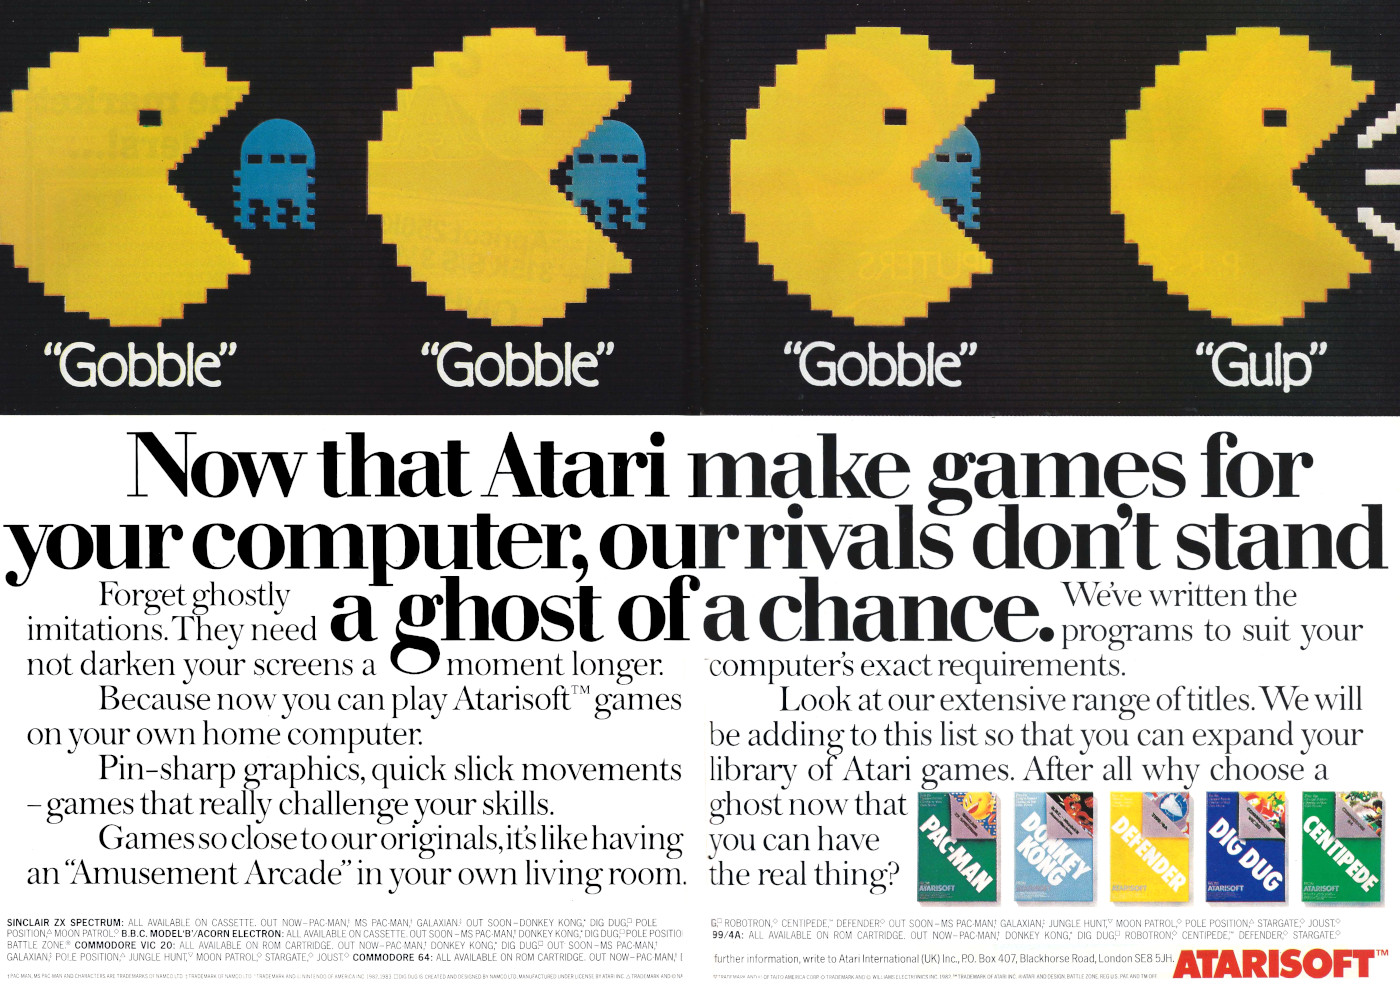 An advert from Atarisoft, which features a dig at clones of the company's games, like Commodore's version of Pac-Man, which it called Jelly Monsters after legal pressure from Atari. From Personal Computer World, March 1984